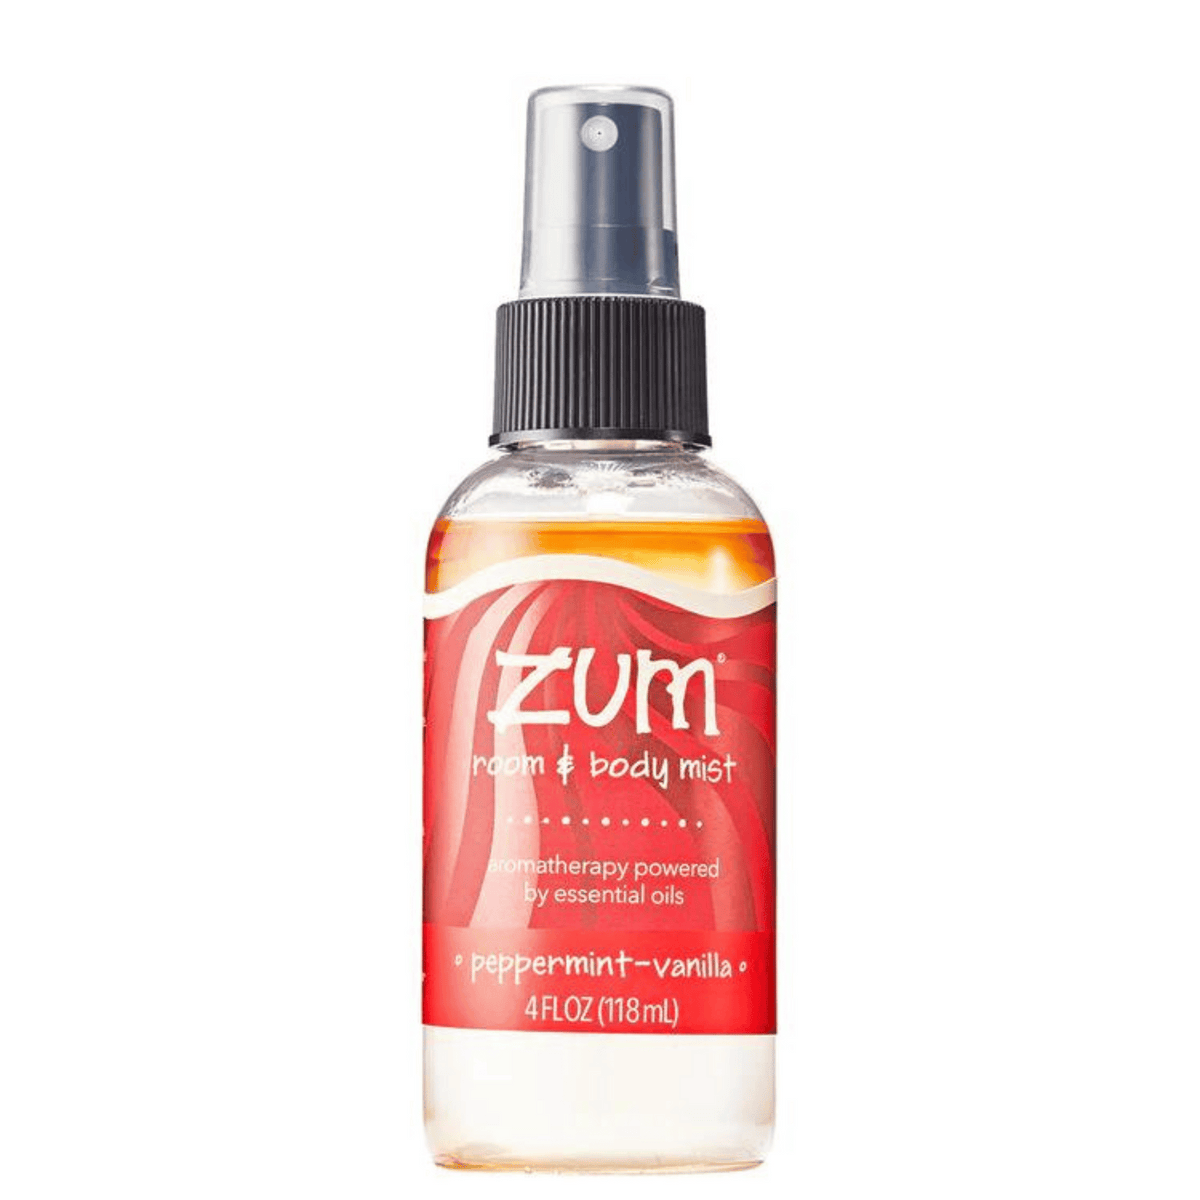 Primary Image of Peppermint Vanilla Room and Body Mist 